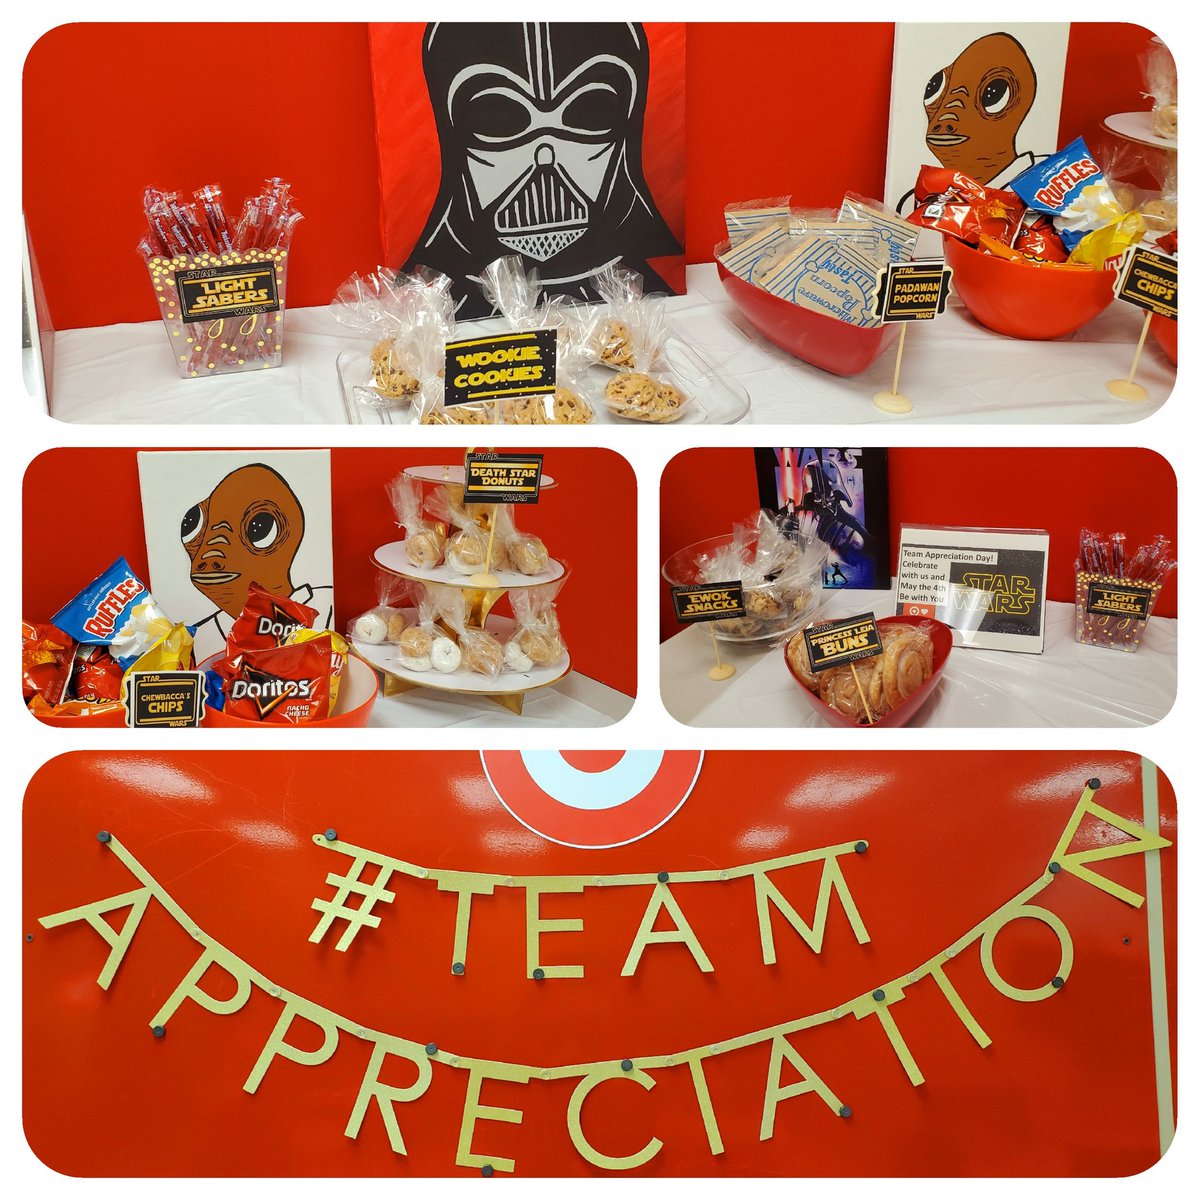 Team Appreciation meets Star Wars. Recognizing our team for all their hard work and Drive. #MayThe4thBeWithYou